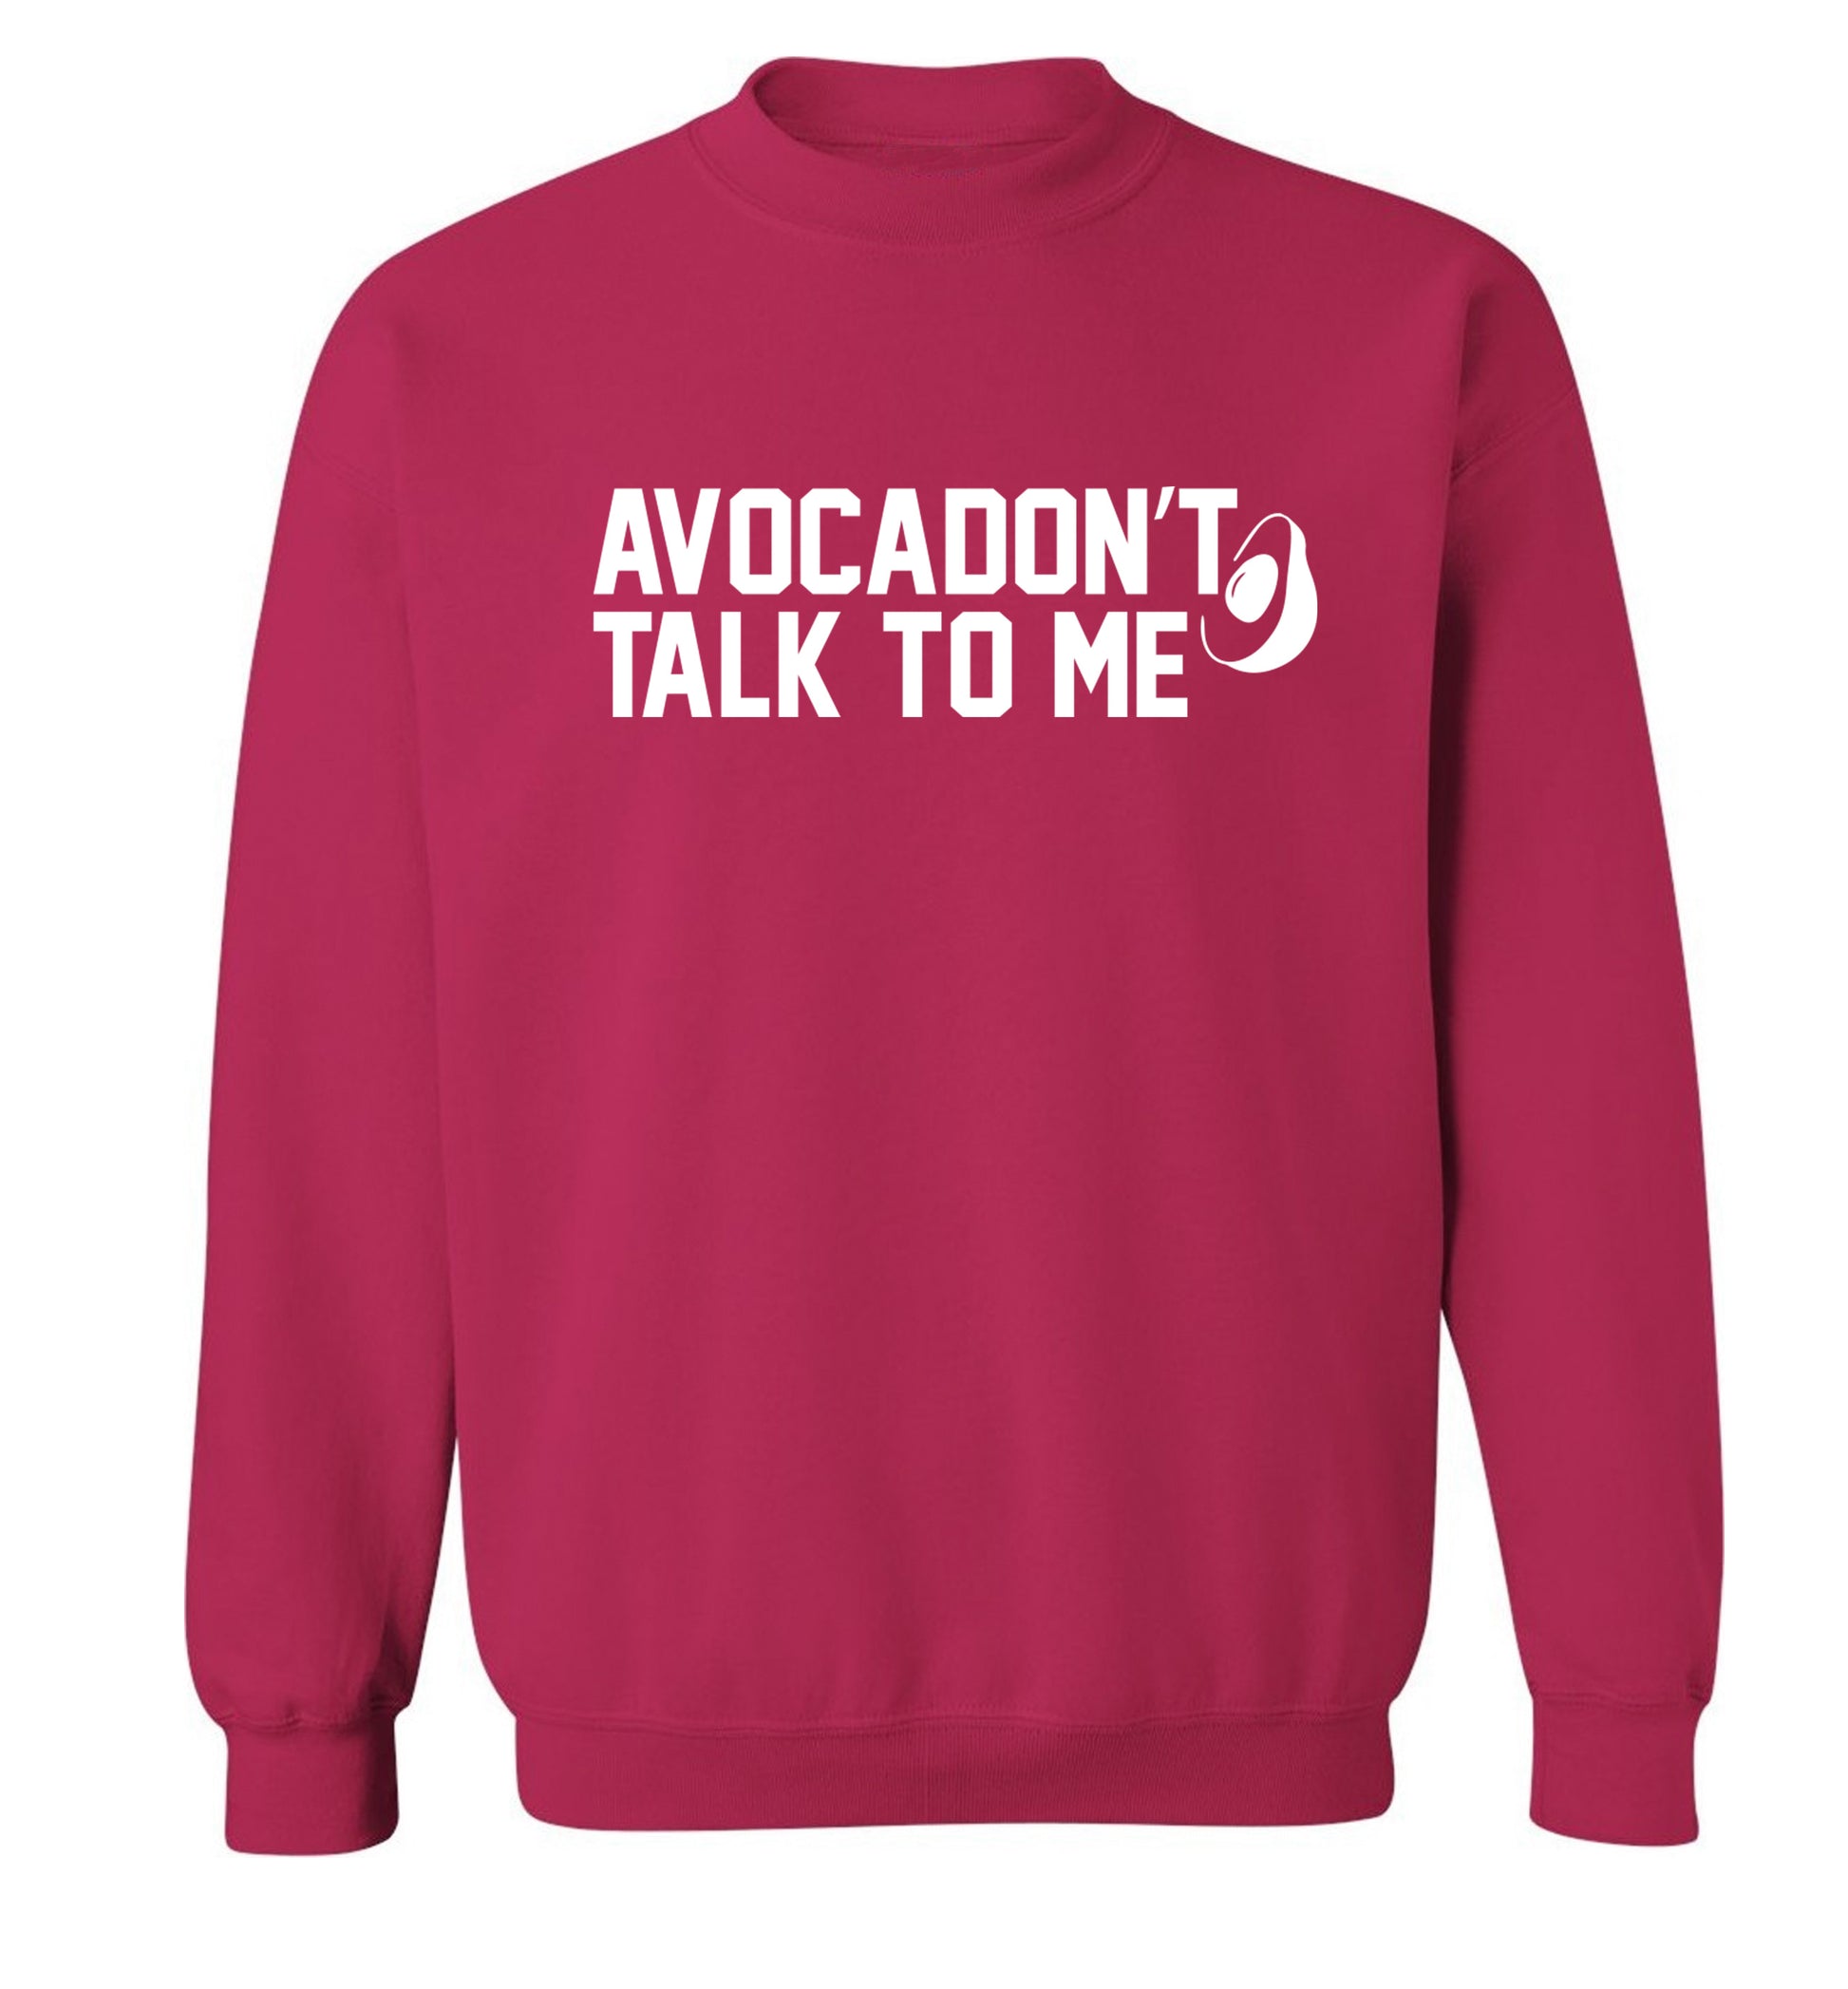 Avocadon't talk to me Adult's unisex pink Sweater 2XL